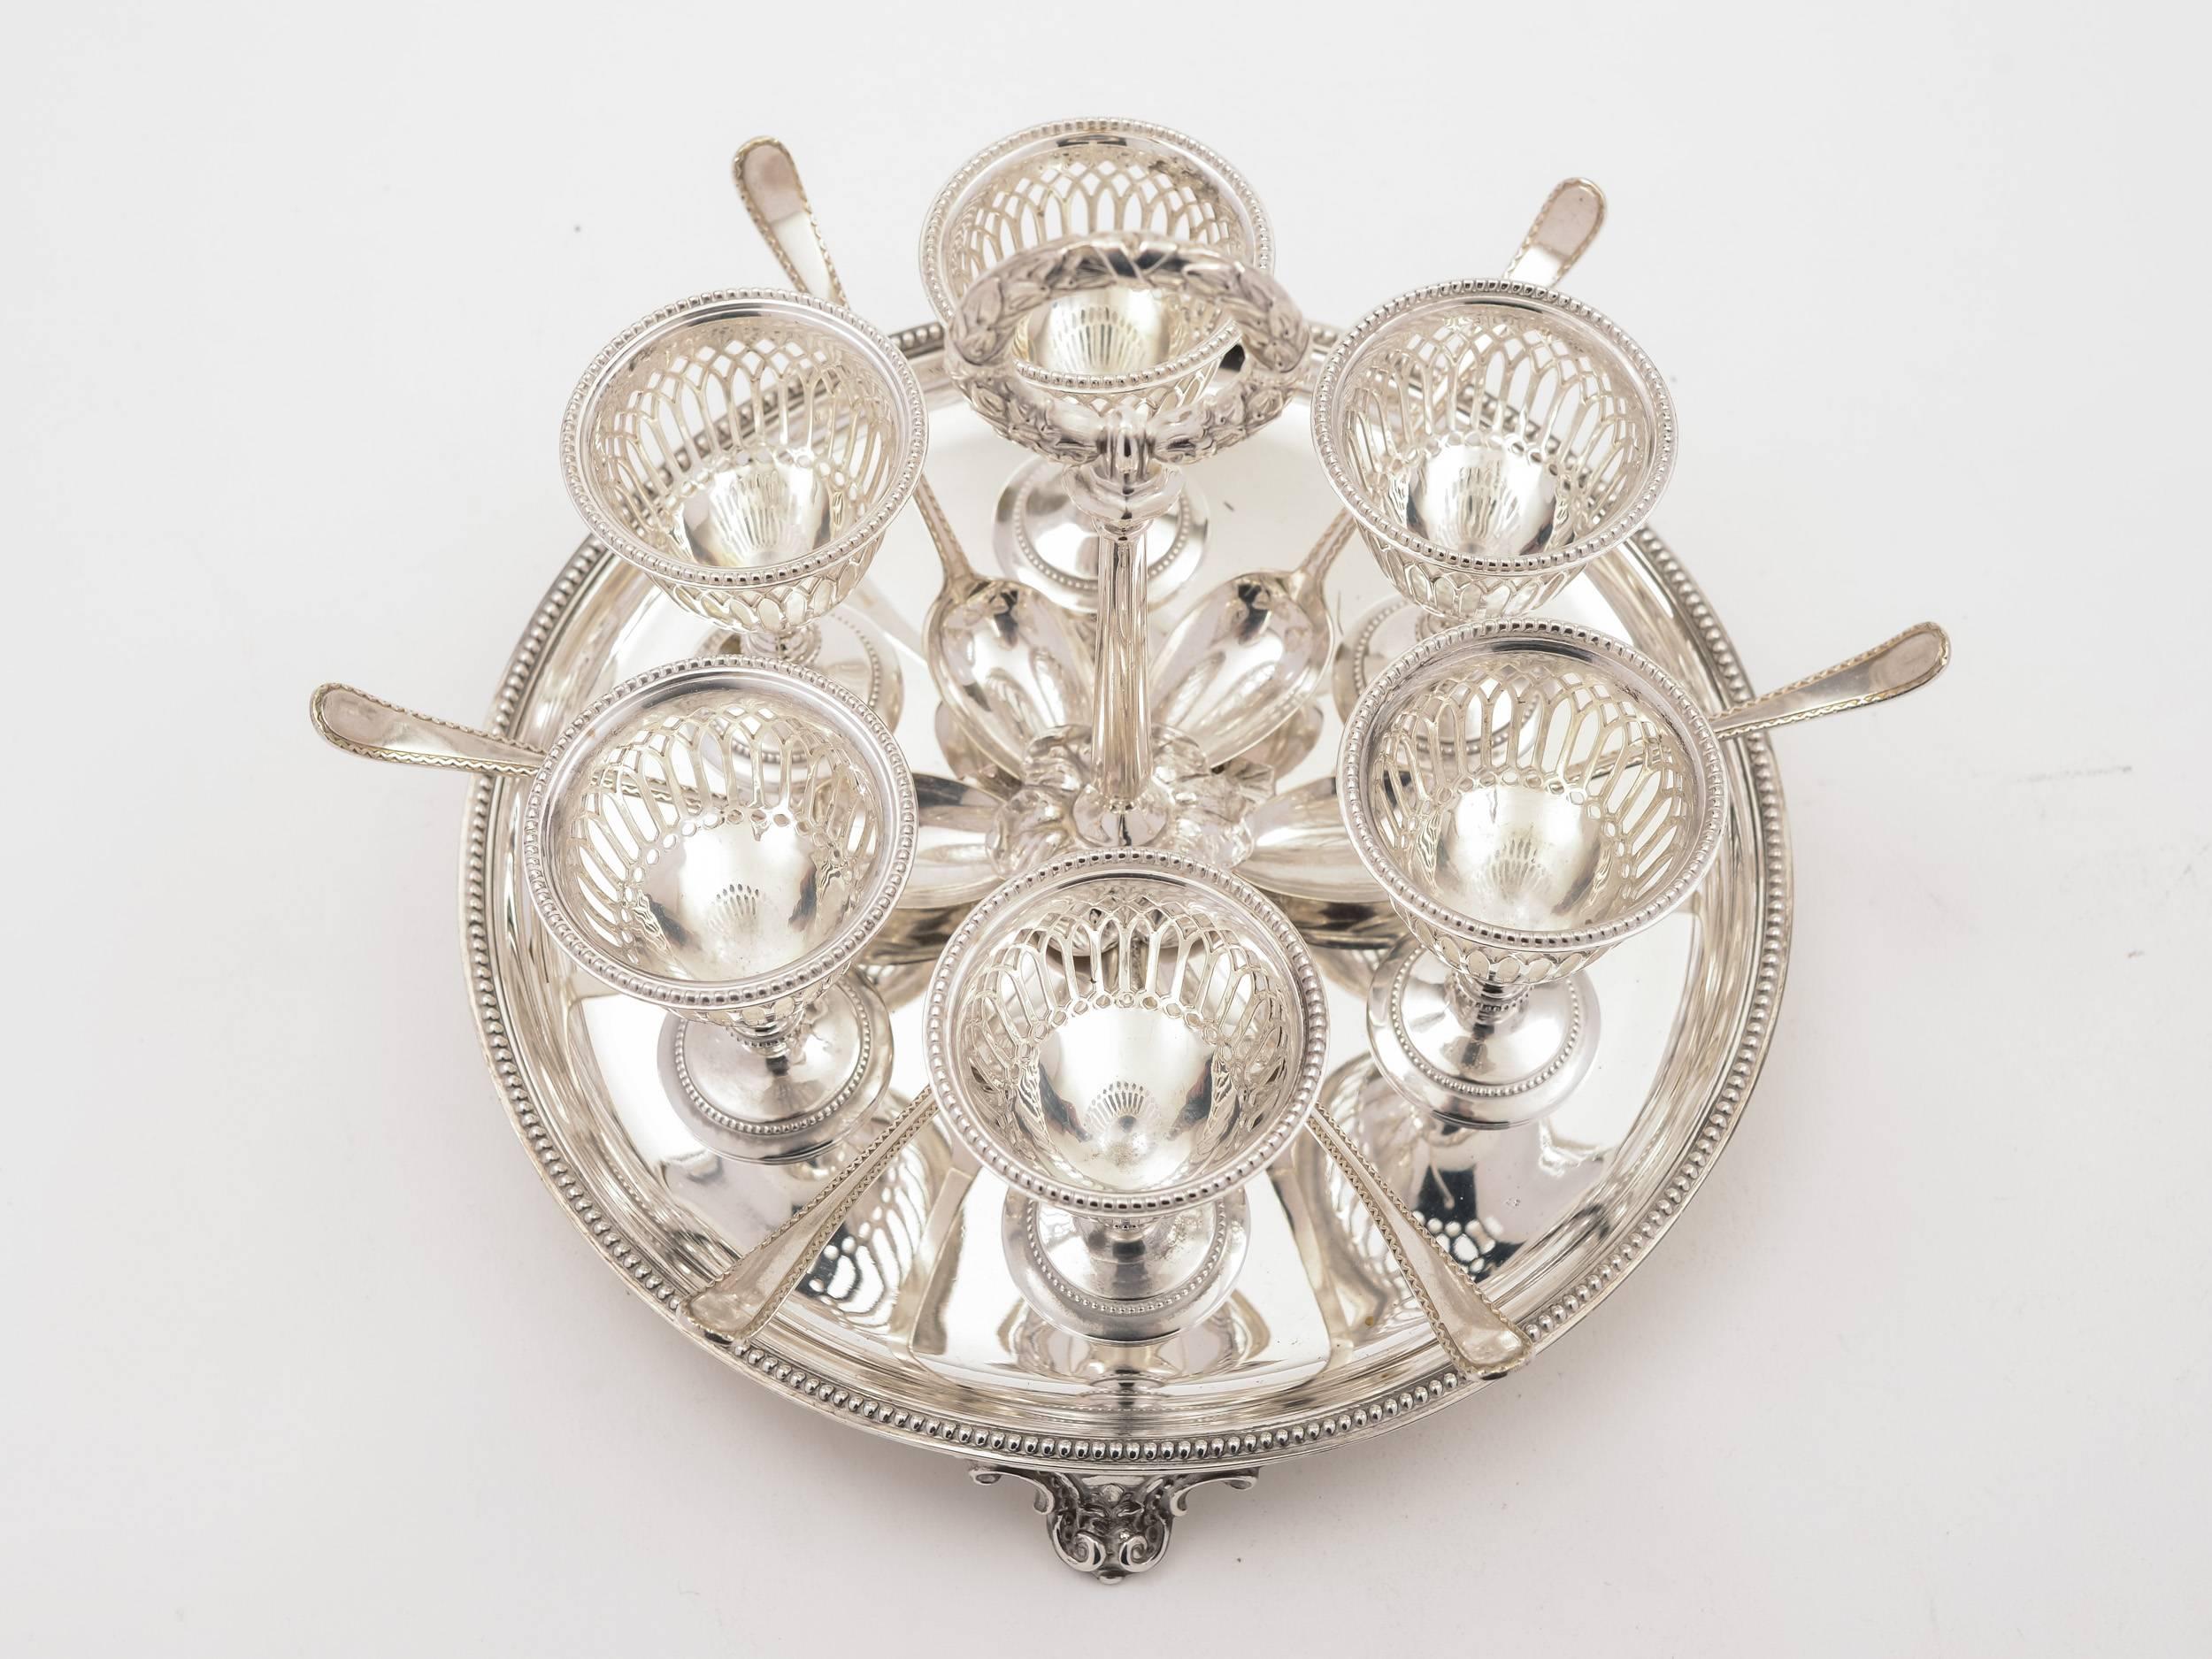 A stunning English Victorian six person silver plated egg cruet with beaded decoration to edge of base, pierced and beaded decoration to egg cups and which sits on cast feet. The carrying handle is modelled on a wreath and there are six accompanying